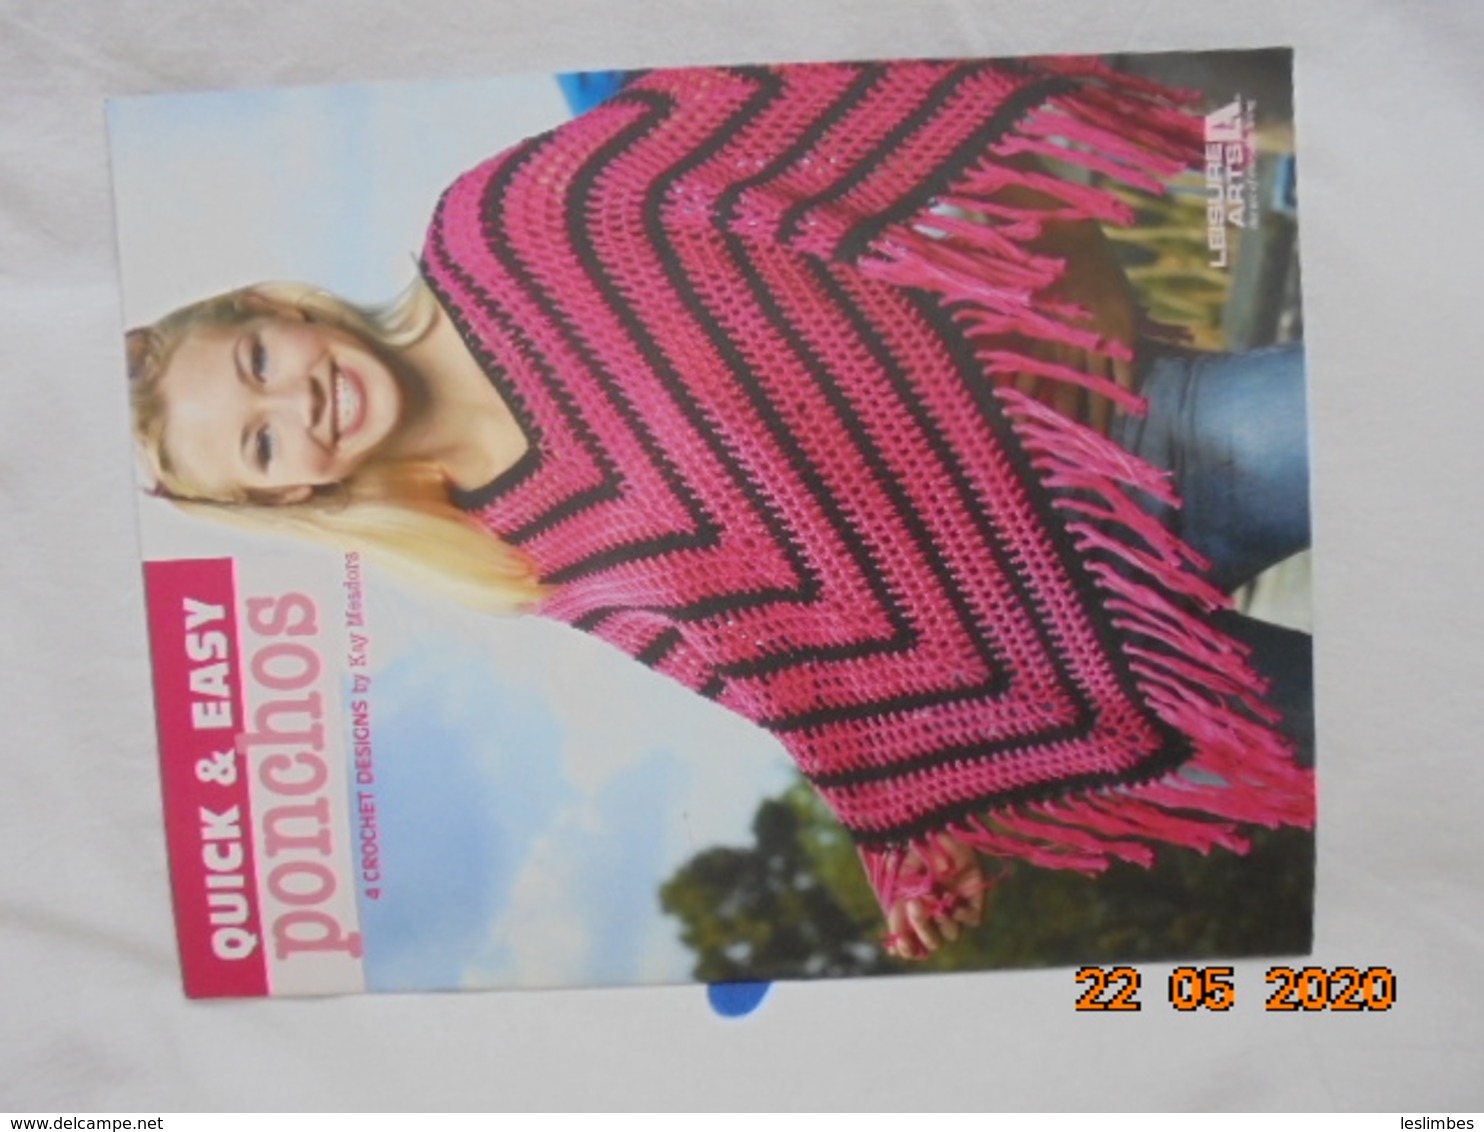 Quick & Easy Ponchos: 4 Crochet Designs. Leisure Arts 3975 By Kay Meadors -- 2004 - Hobby Creativi